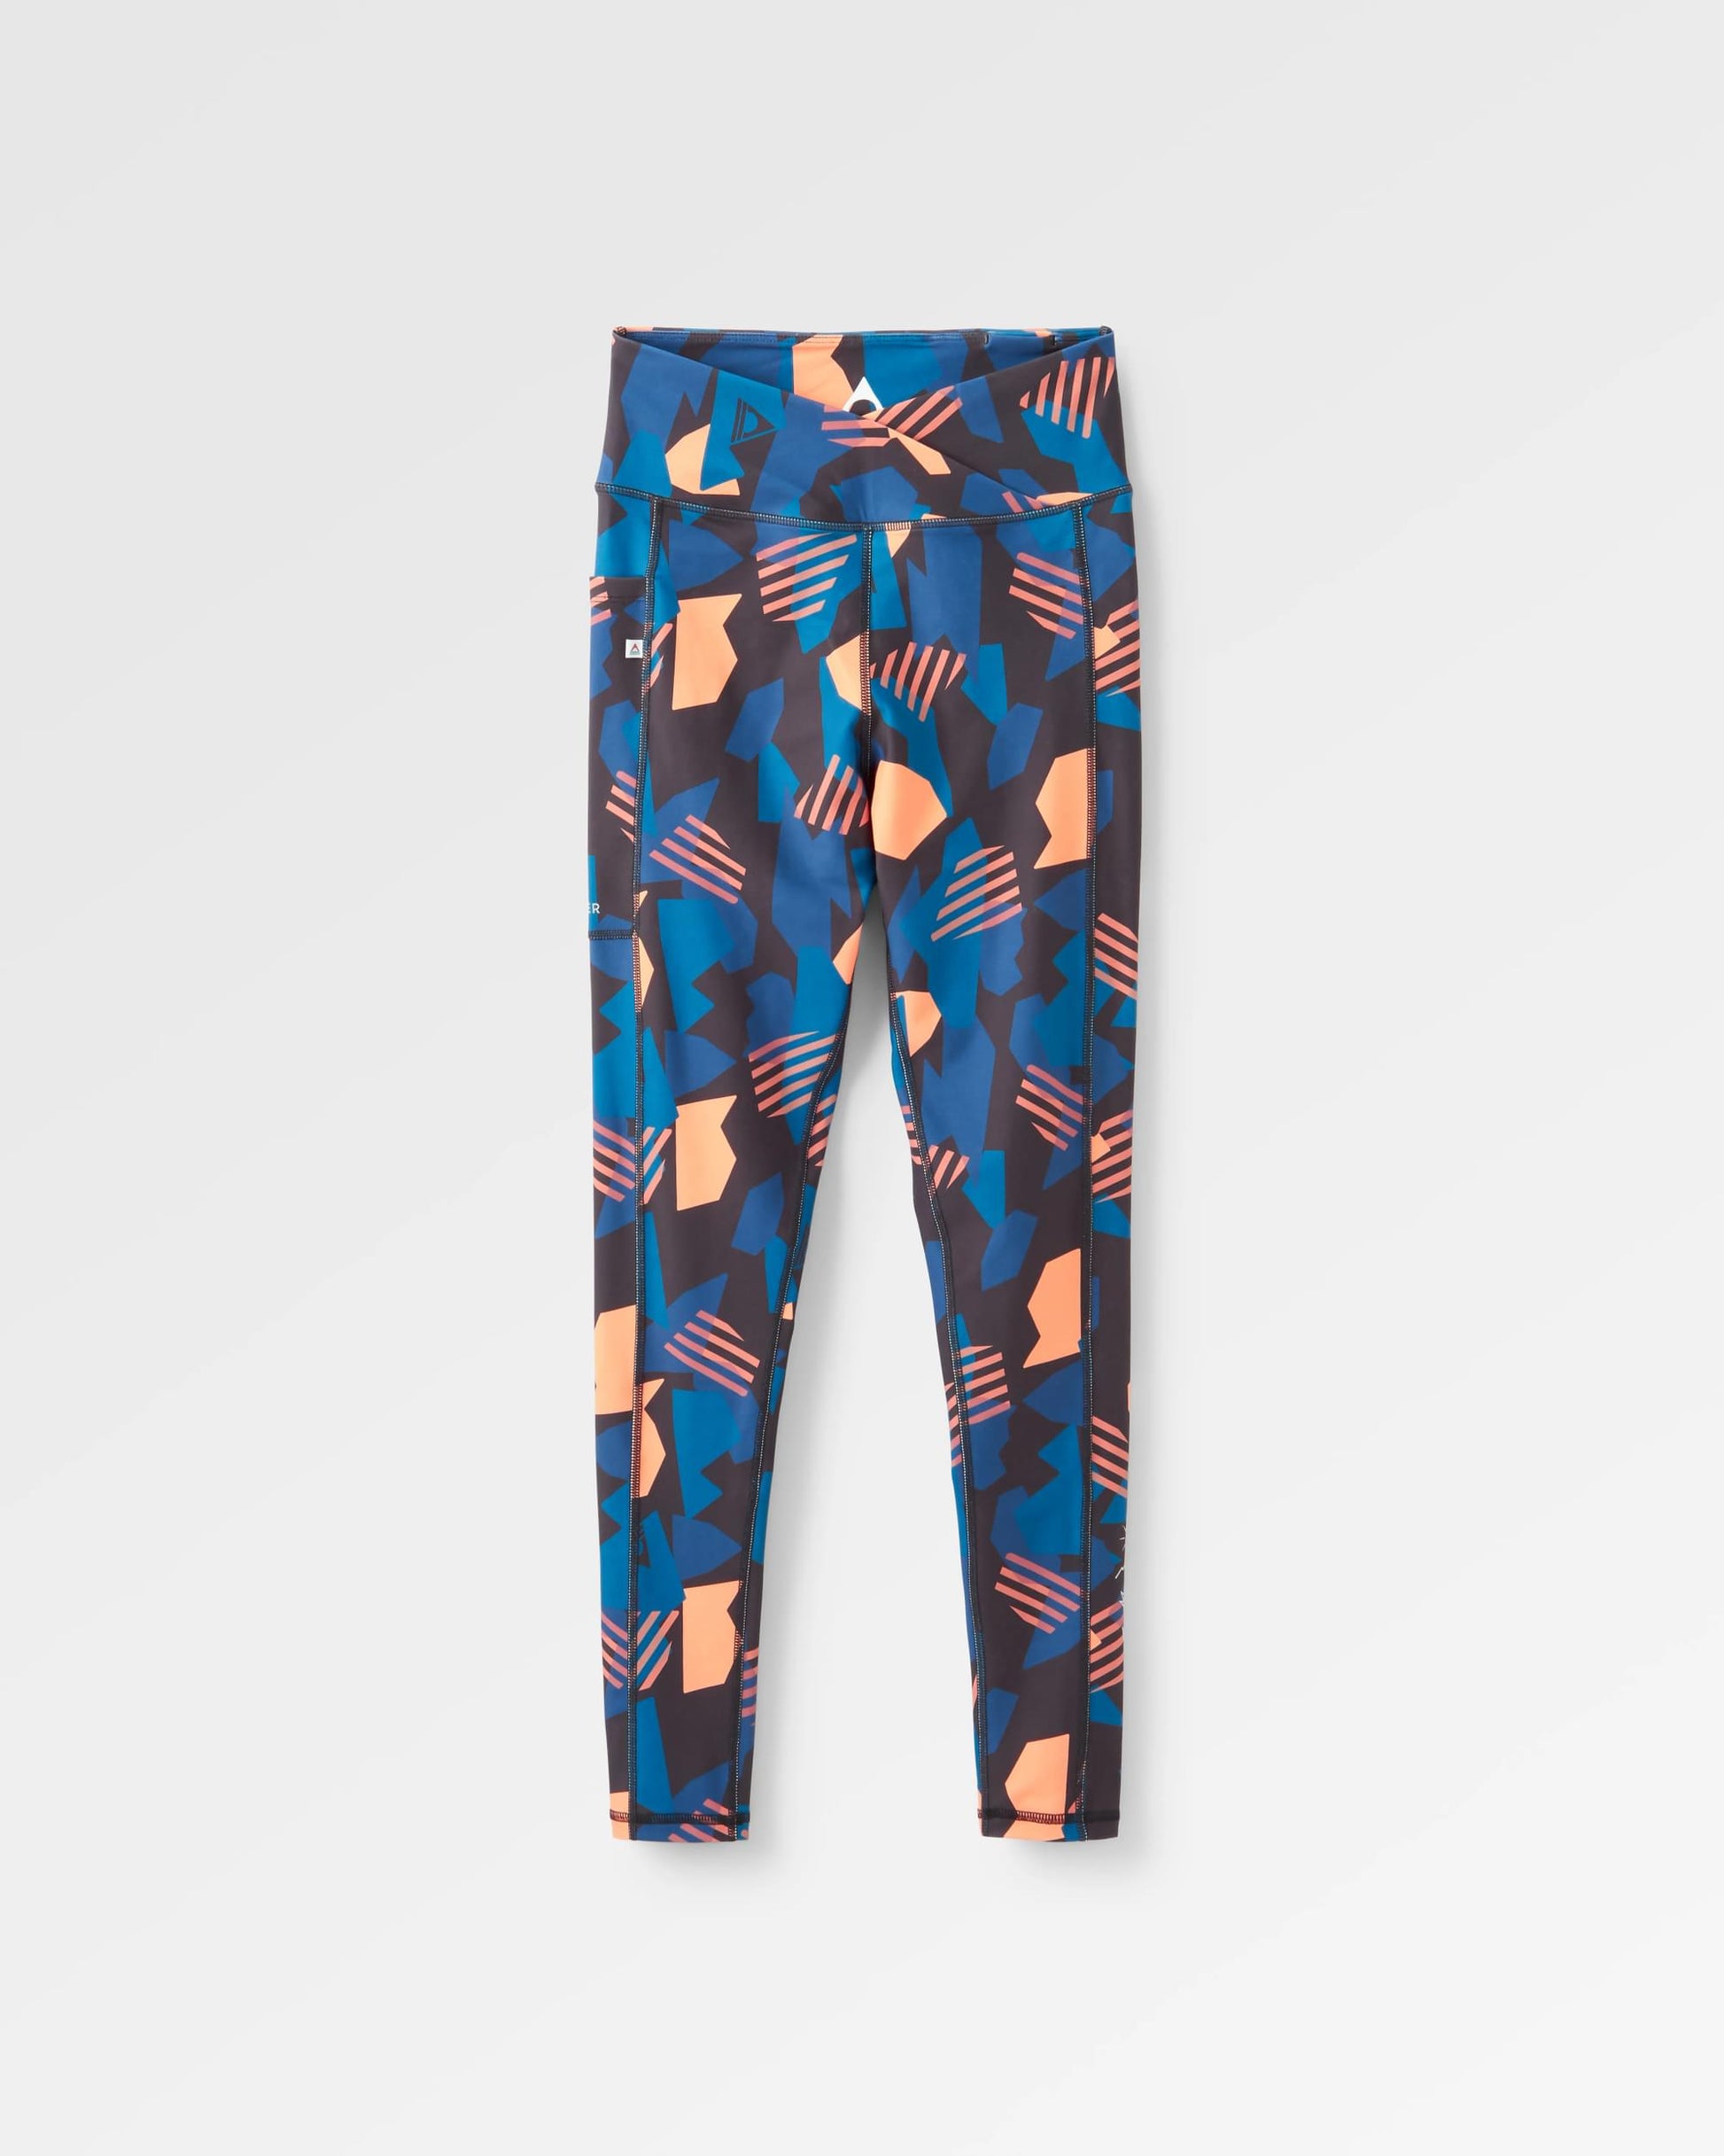 Fresh Air 2.0 Recycled Leggings - Apricot Camo